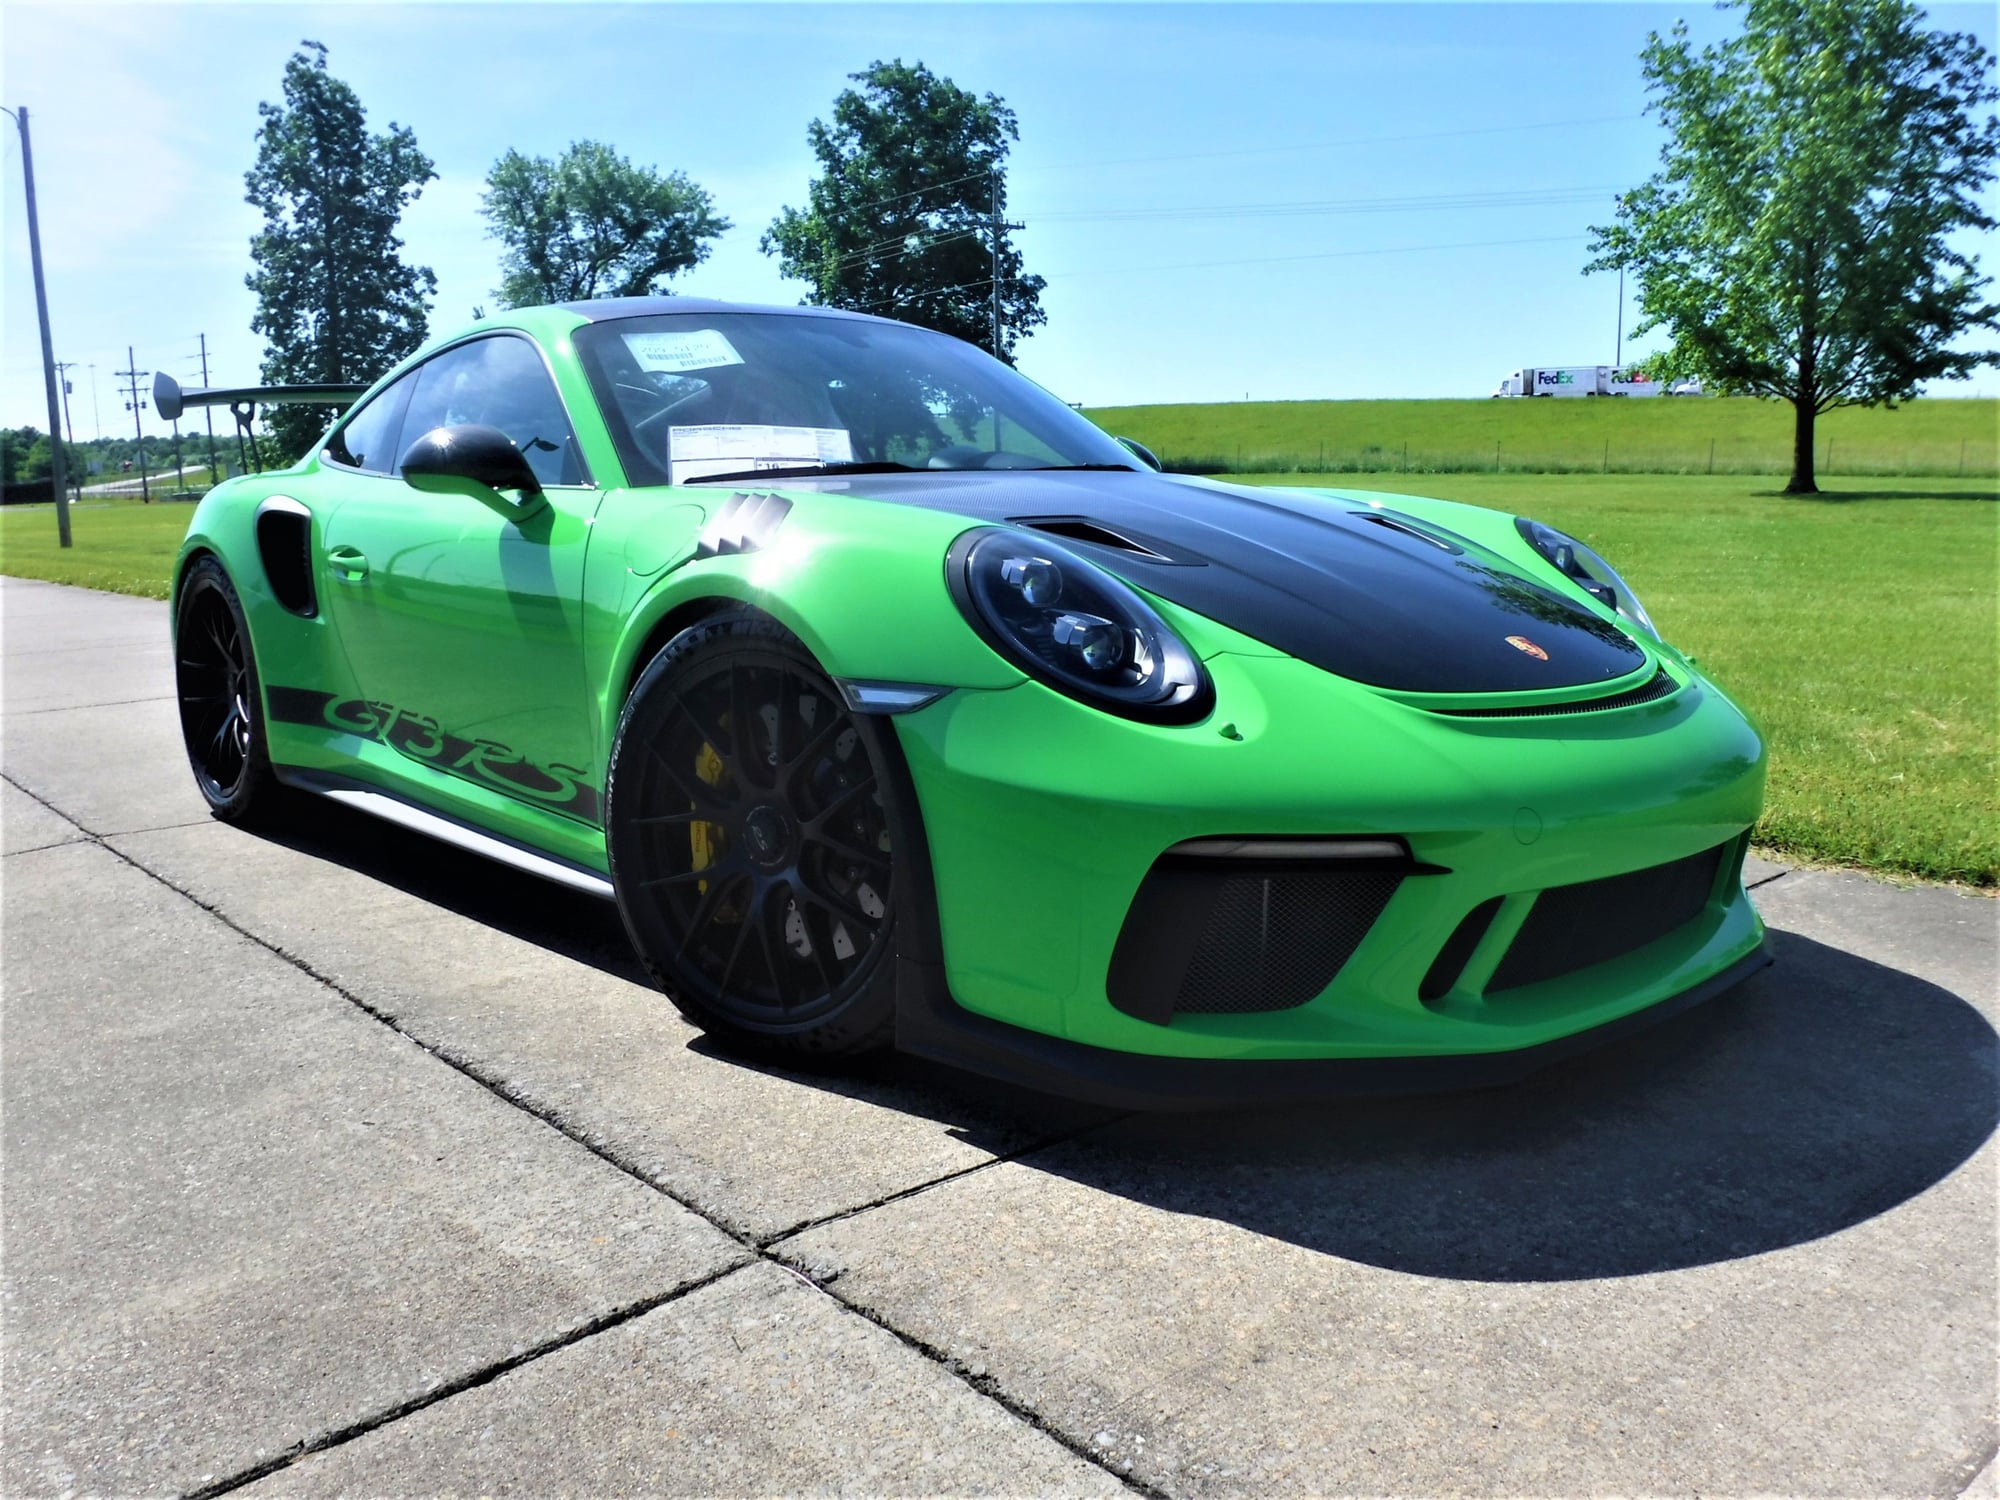 2019 Porsche GT3 - 2019 GT3 RS with Weissach and Magnesium wheels - Used - VIN WP0AF2A95KS165786 - 11 Miles - Paducah, KY 42003, United States